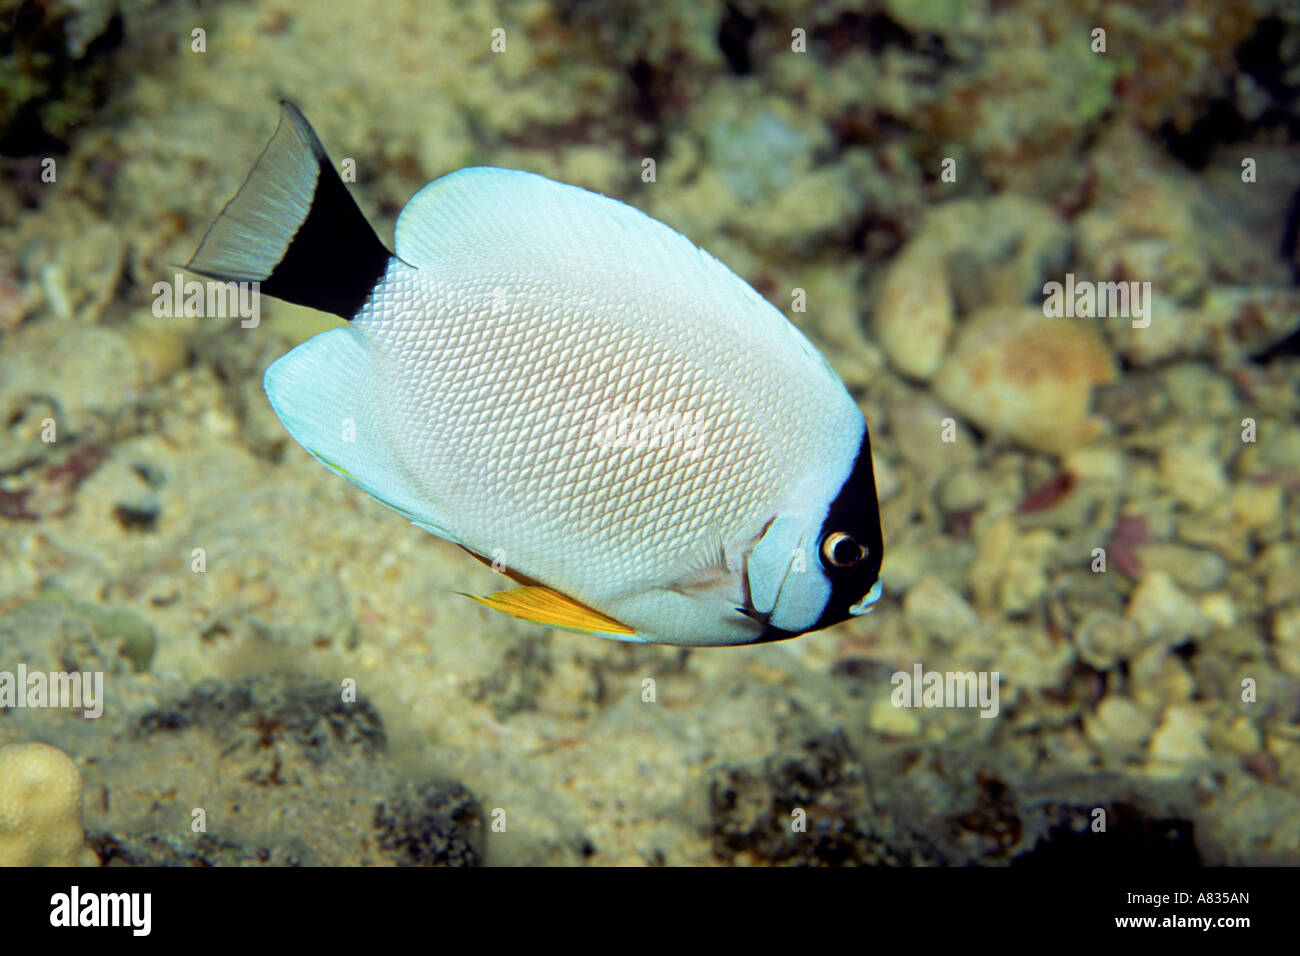 The white and black masked angelfish, Genicanthus personatus, is one of the world s rarest coral reef fish, Hawaii. Stock Photo